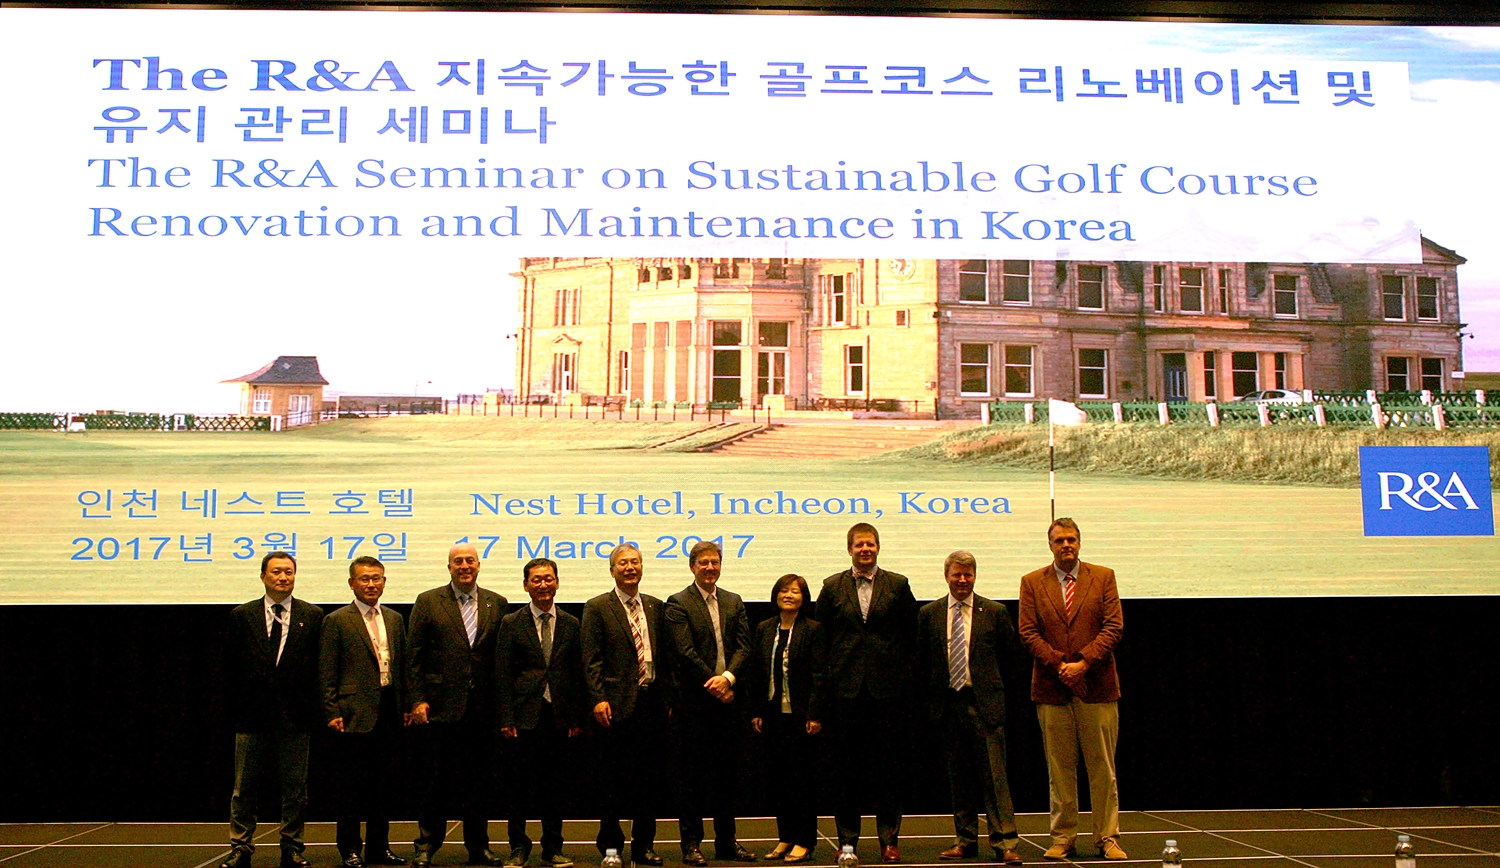 Expert panel members presented at The R&A's Sustainability in Golf seminars